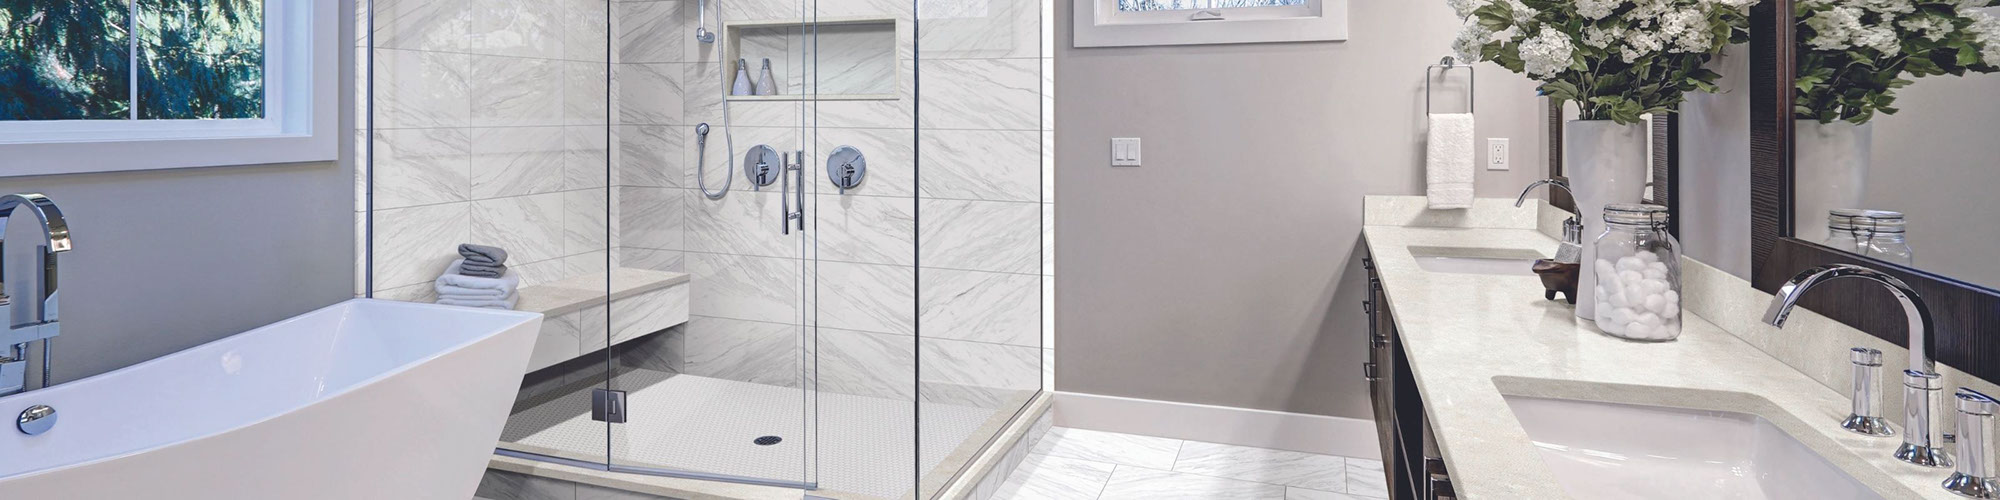 Bathroom with white & gray veining floor and shower tile that looks like marble, shower with bench and frameless glass walls, and free-standing soaker tub.